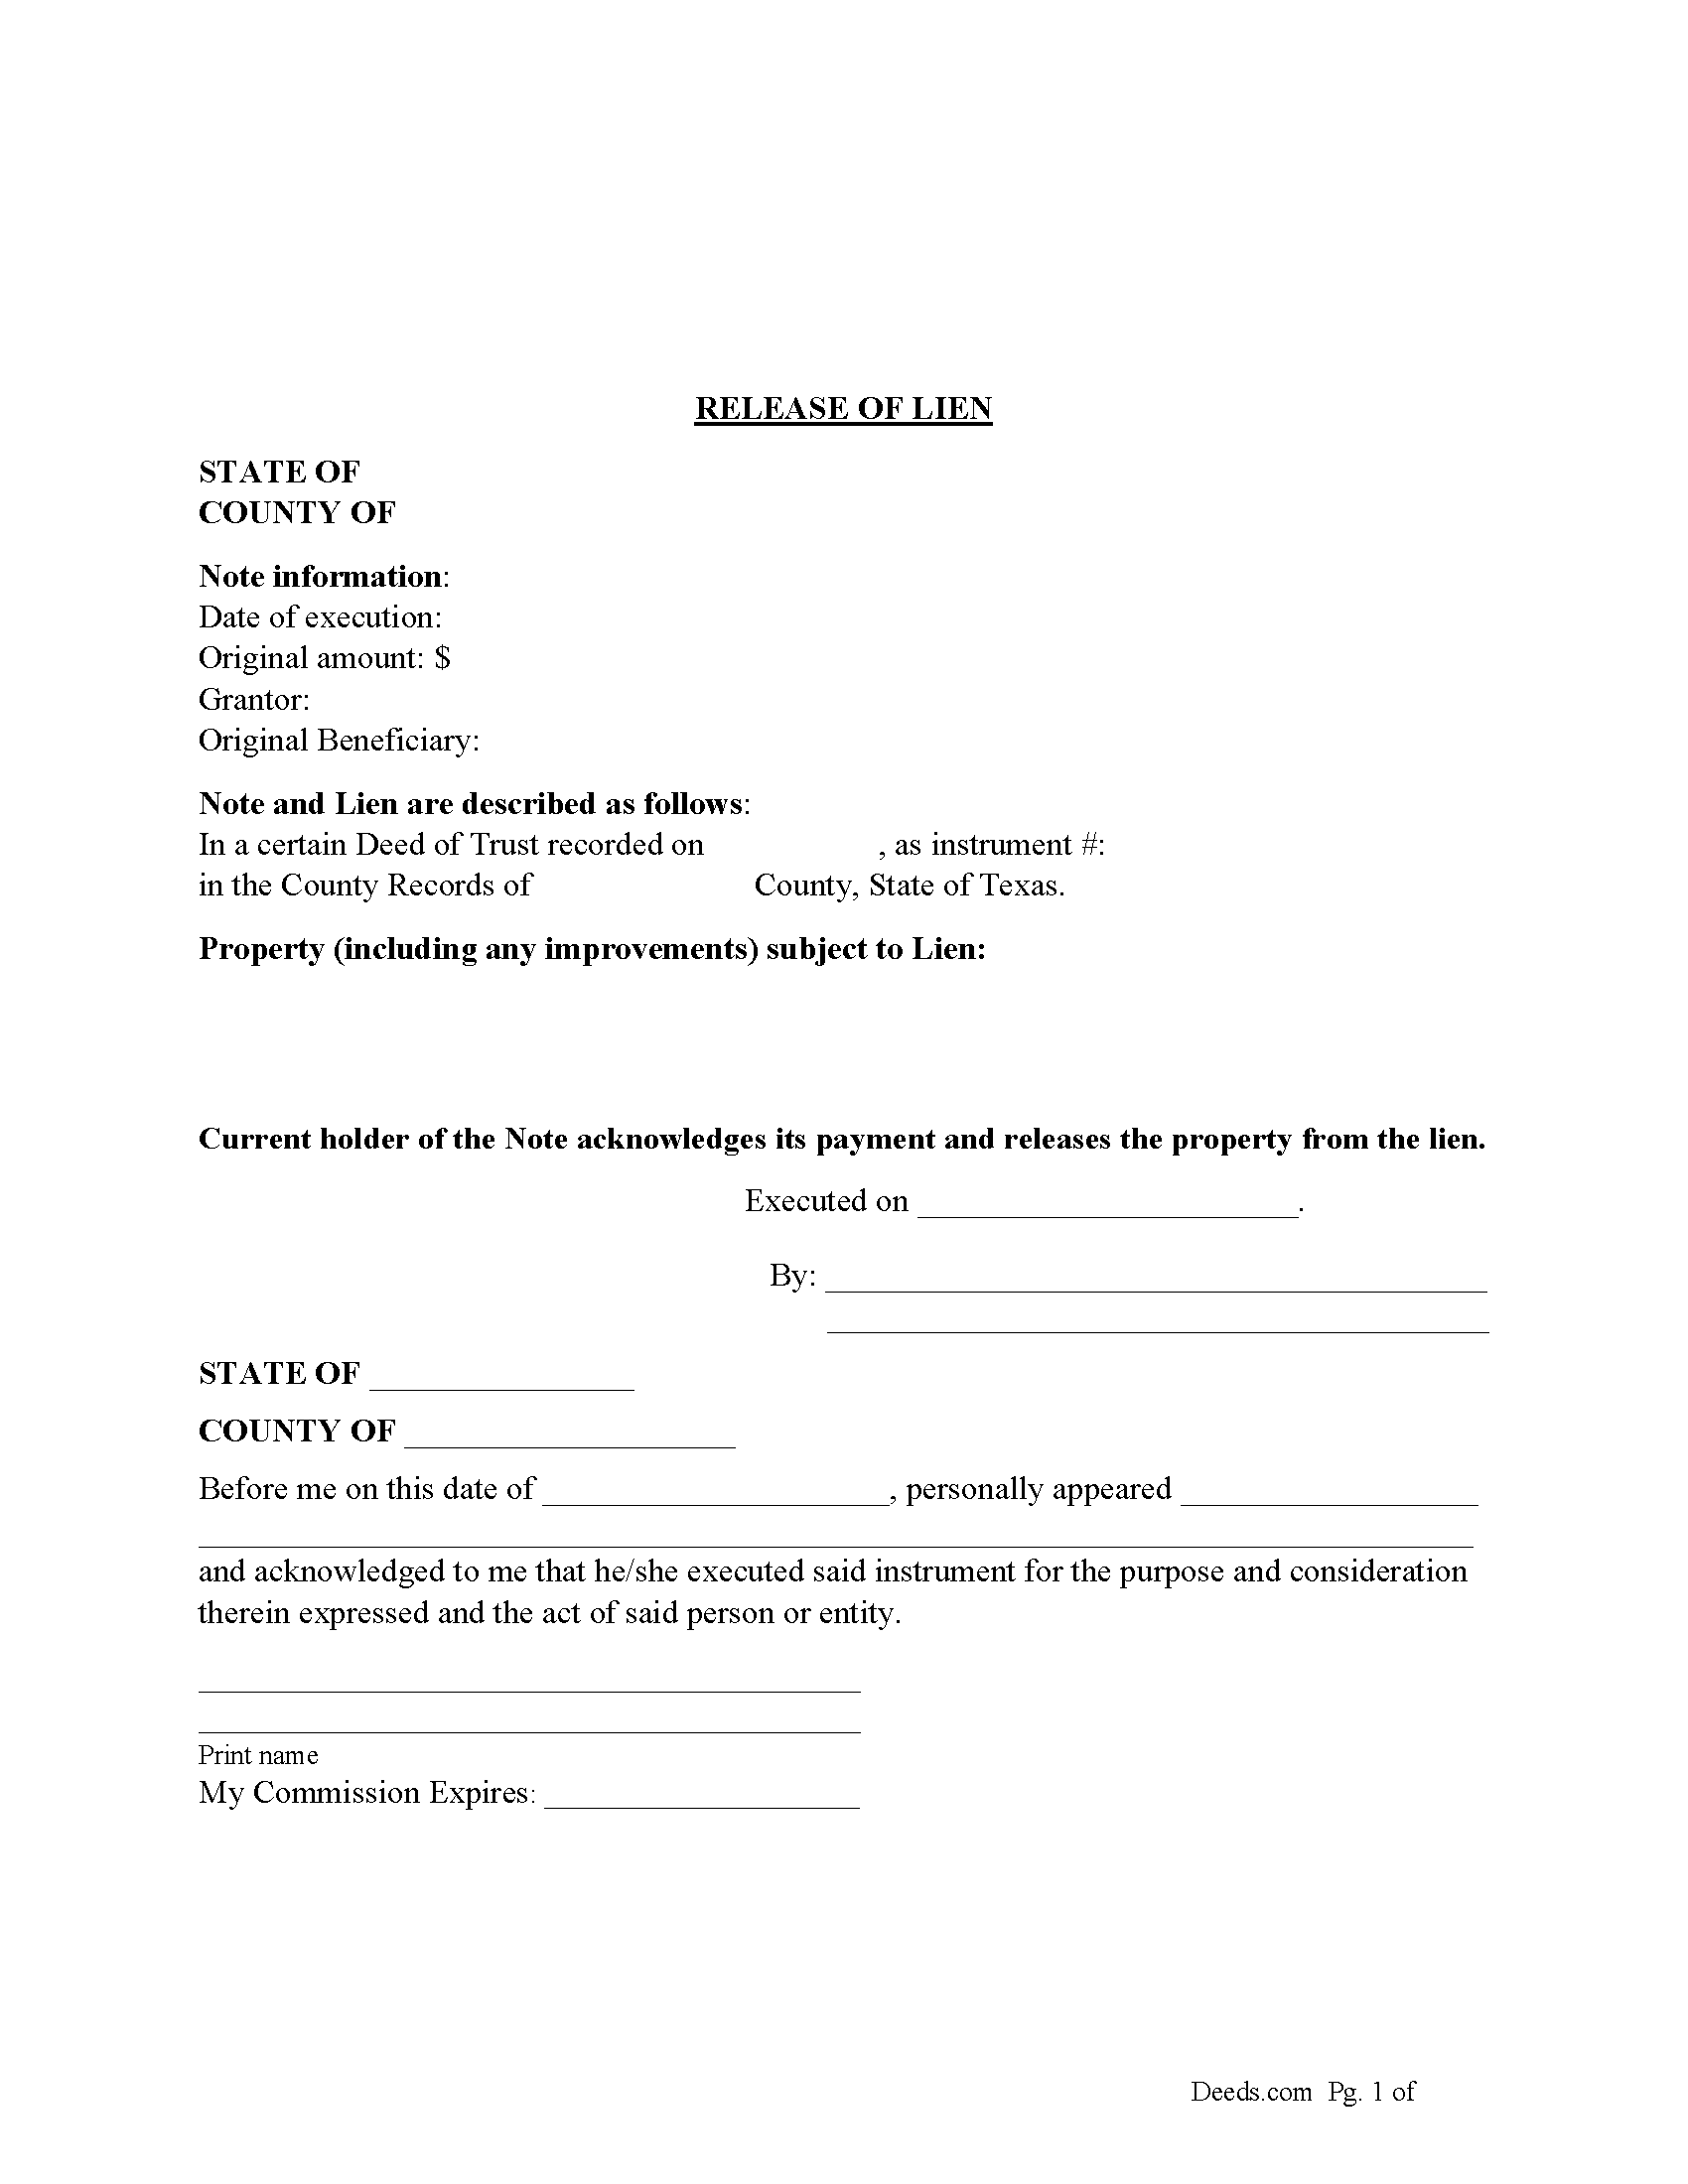 Texas Release of Lien - by Deed of Trust and Note Image